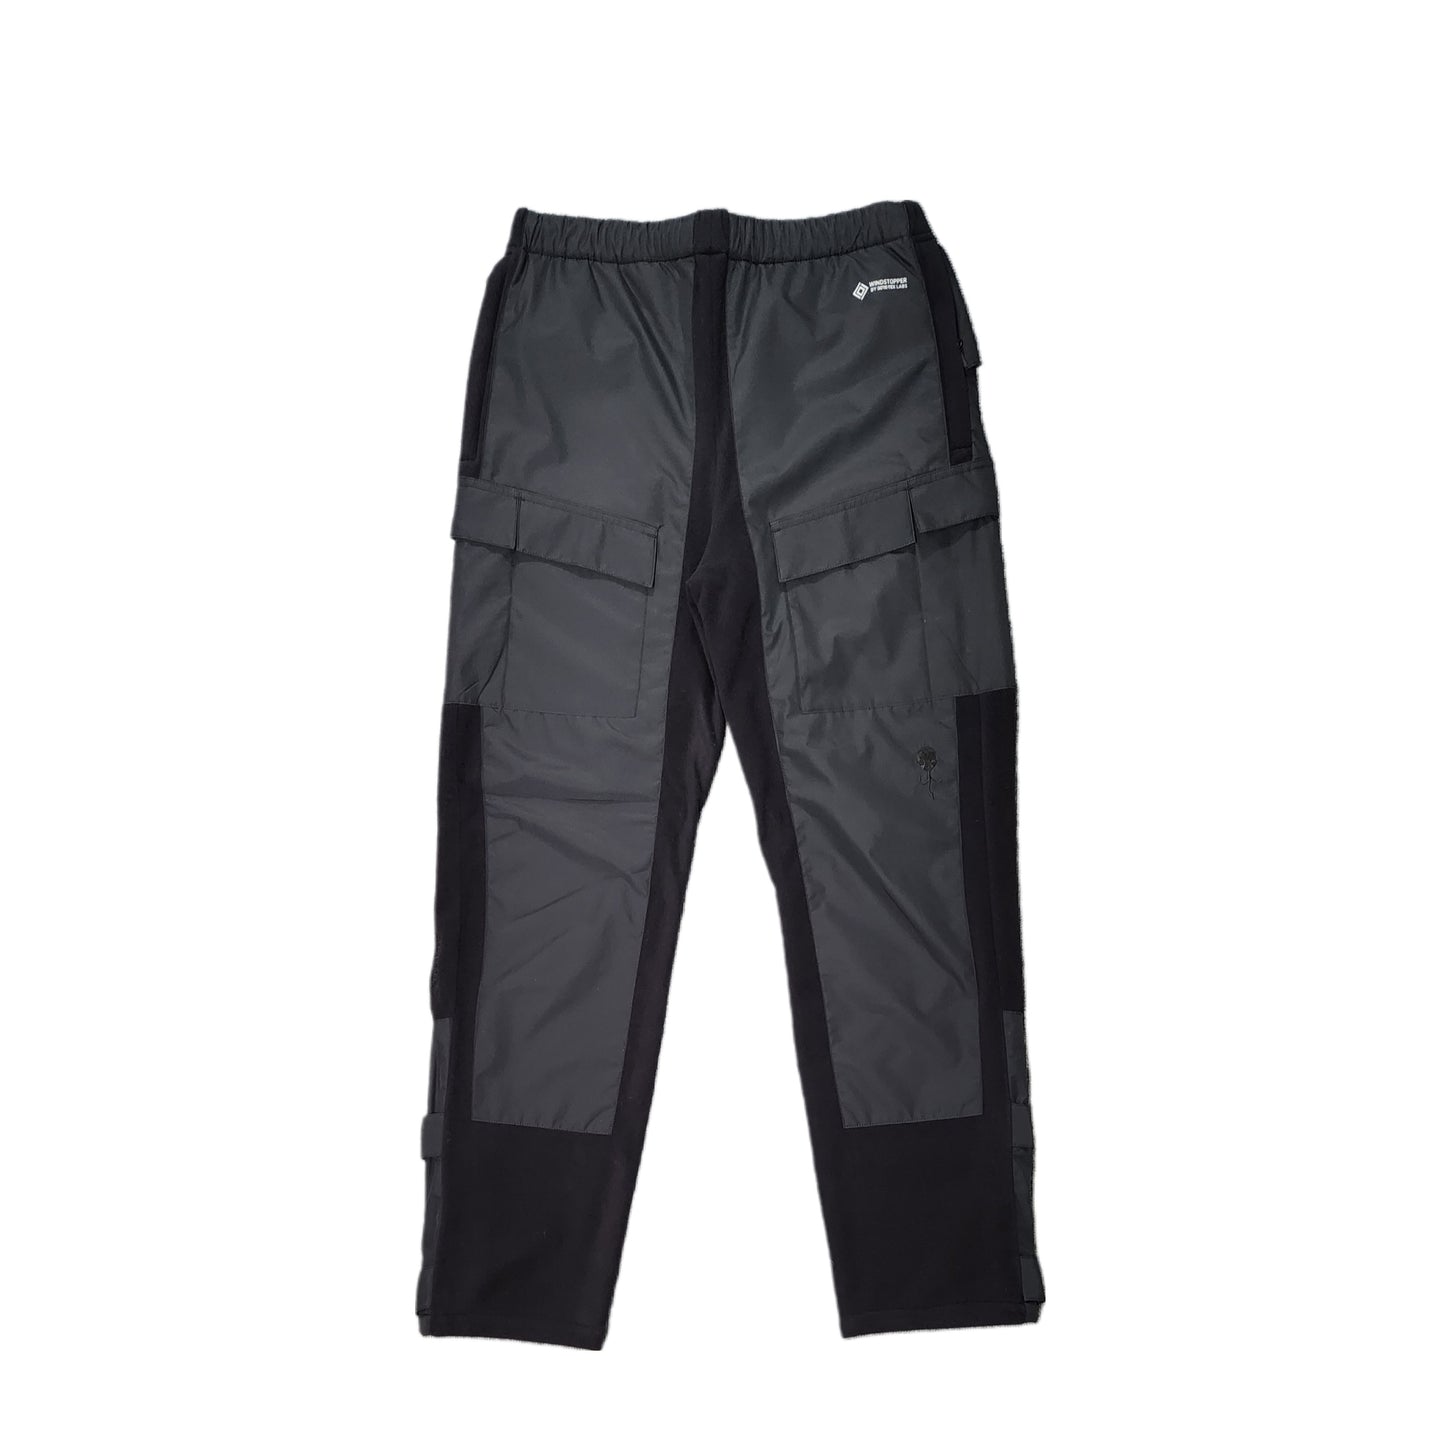 WINDSTOPPER GORE-TEX 2LAYER TROUSERS PANT